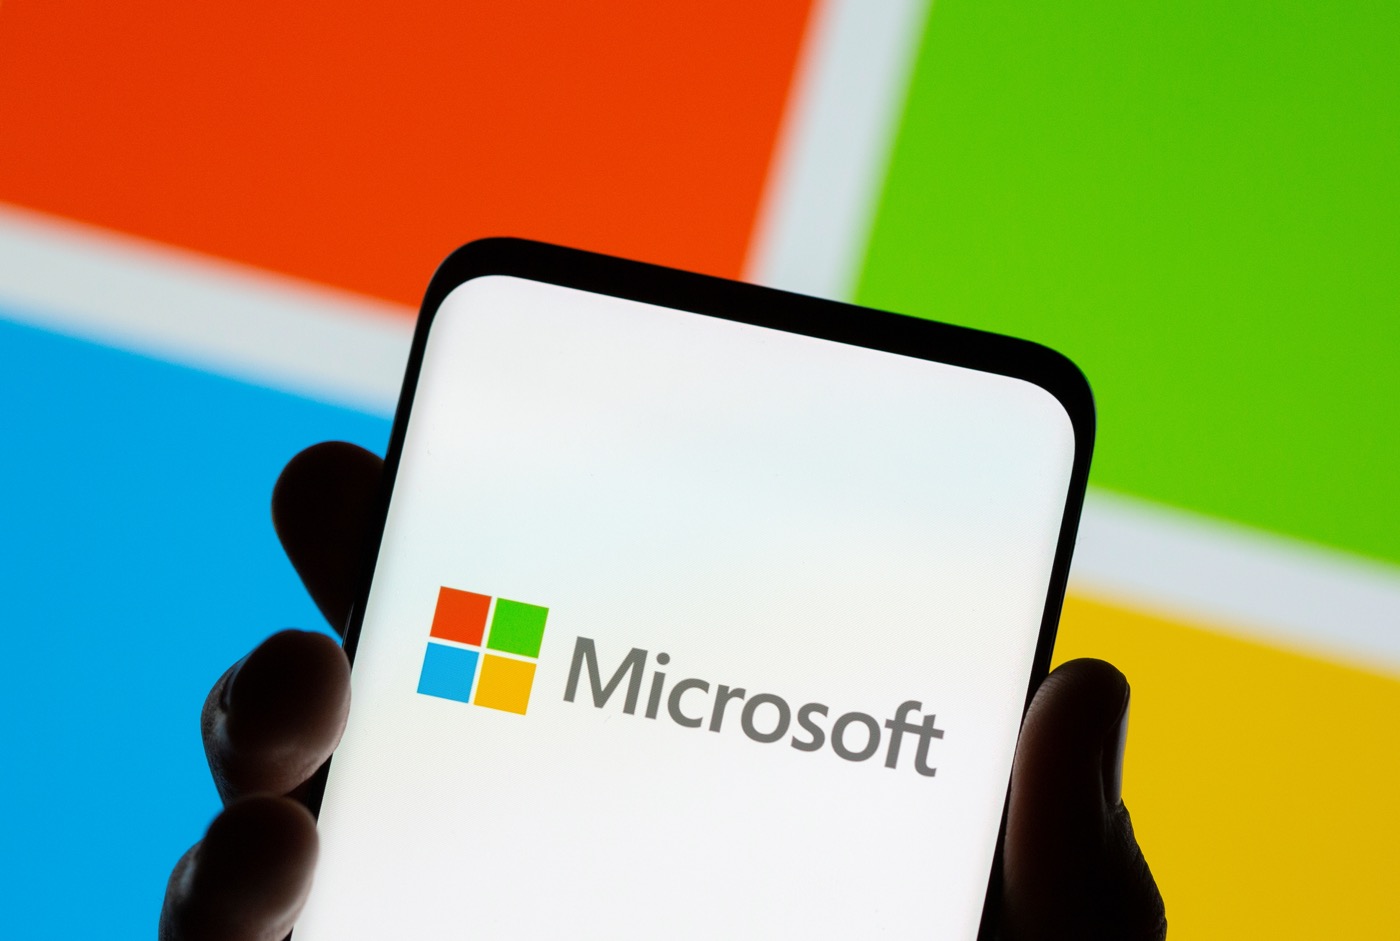 Competition: Microsoft is placed under increased surveillance by the German regulator